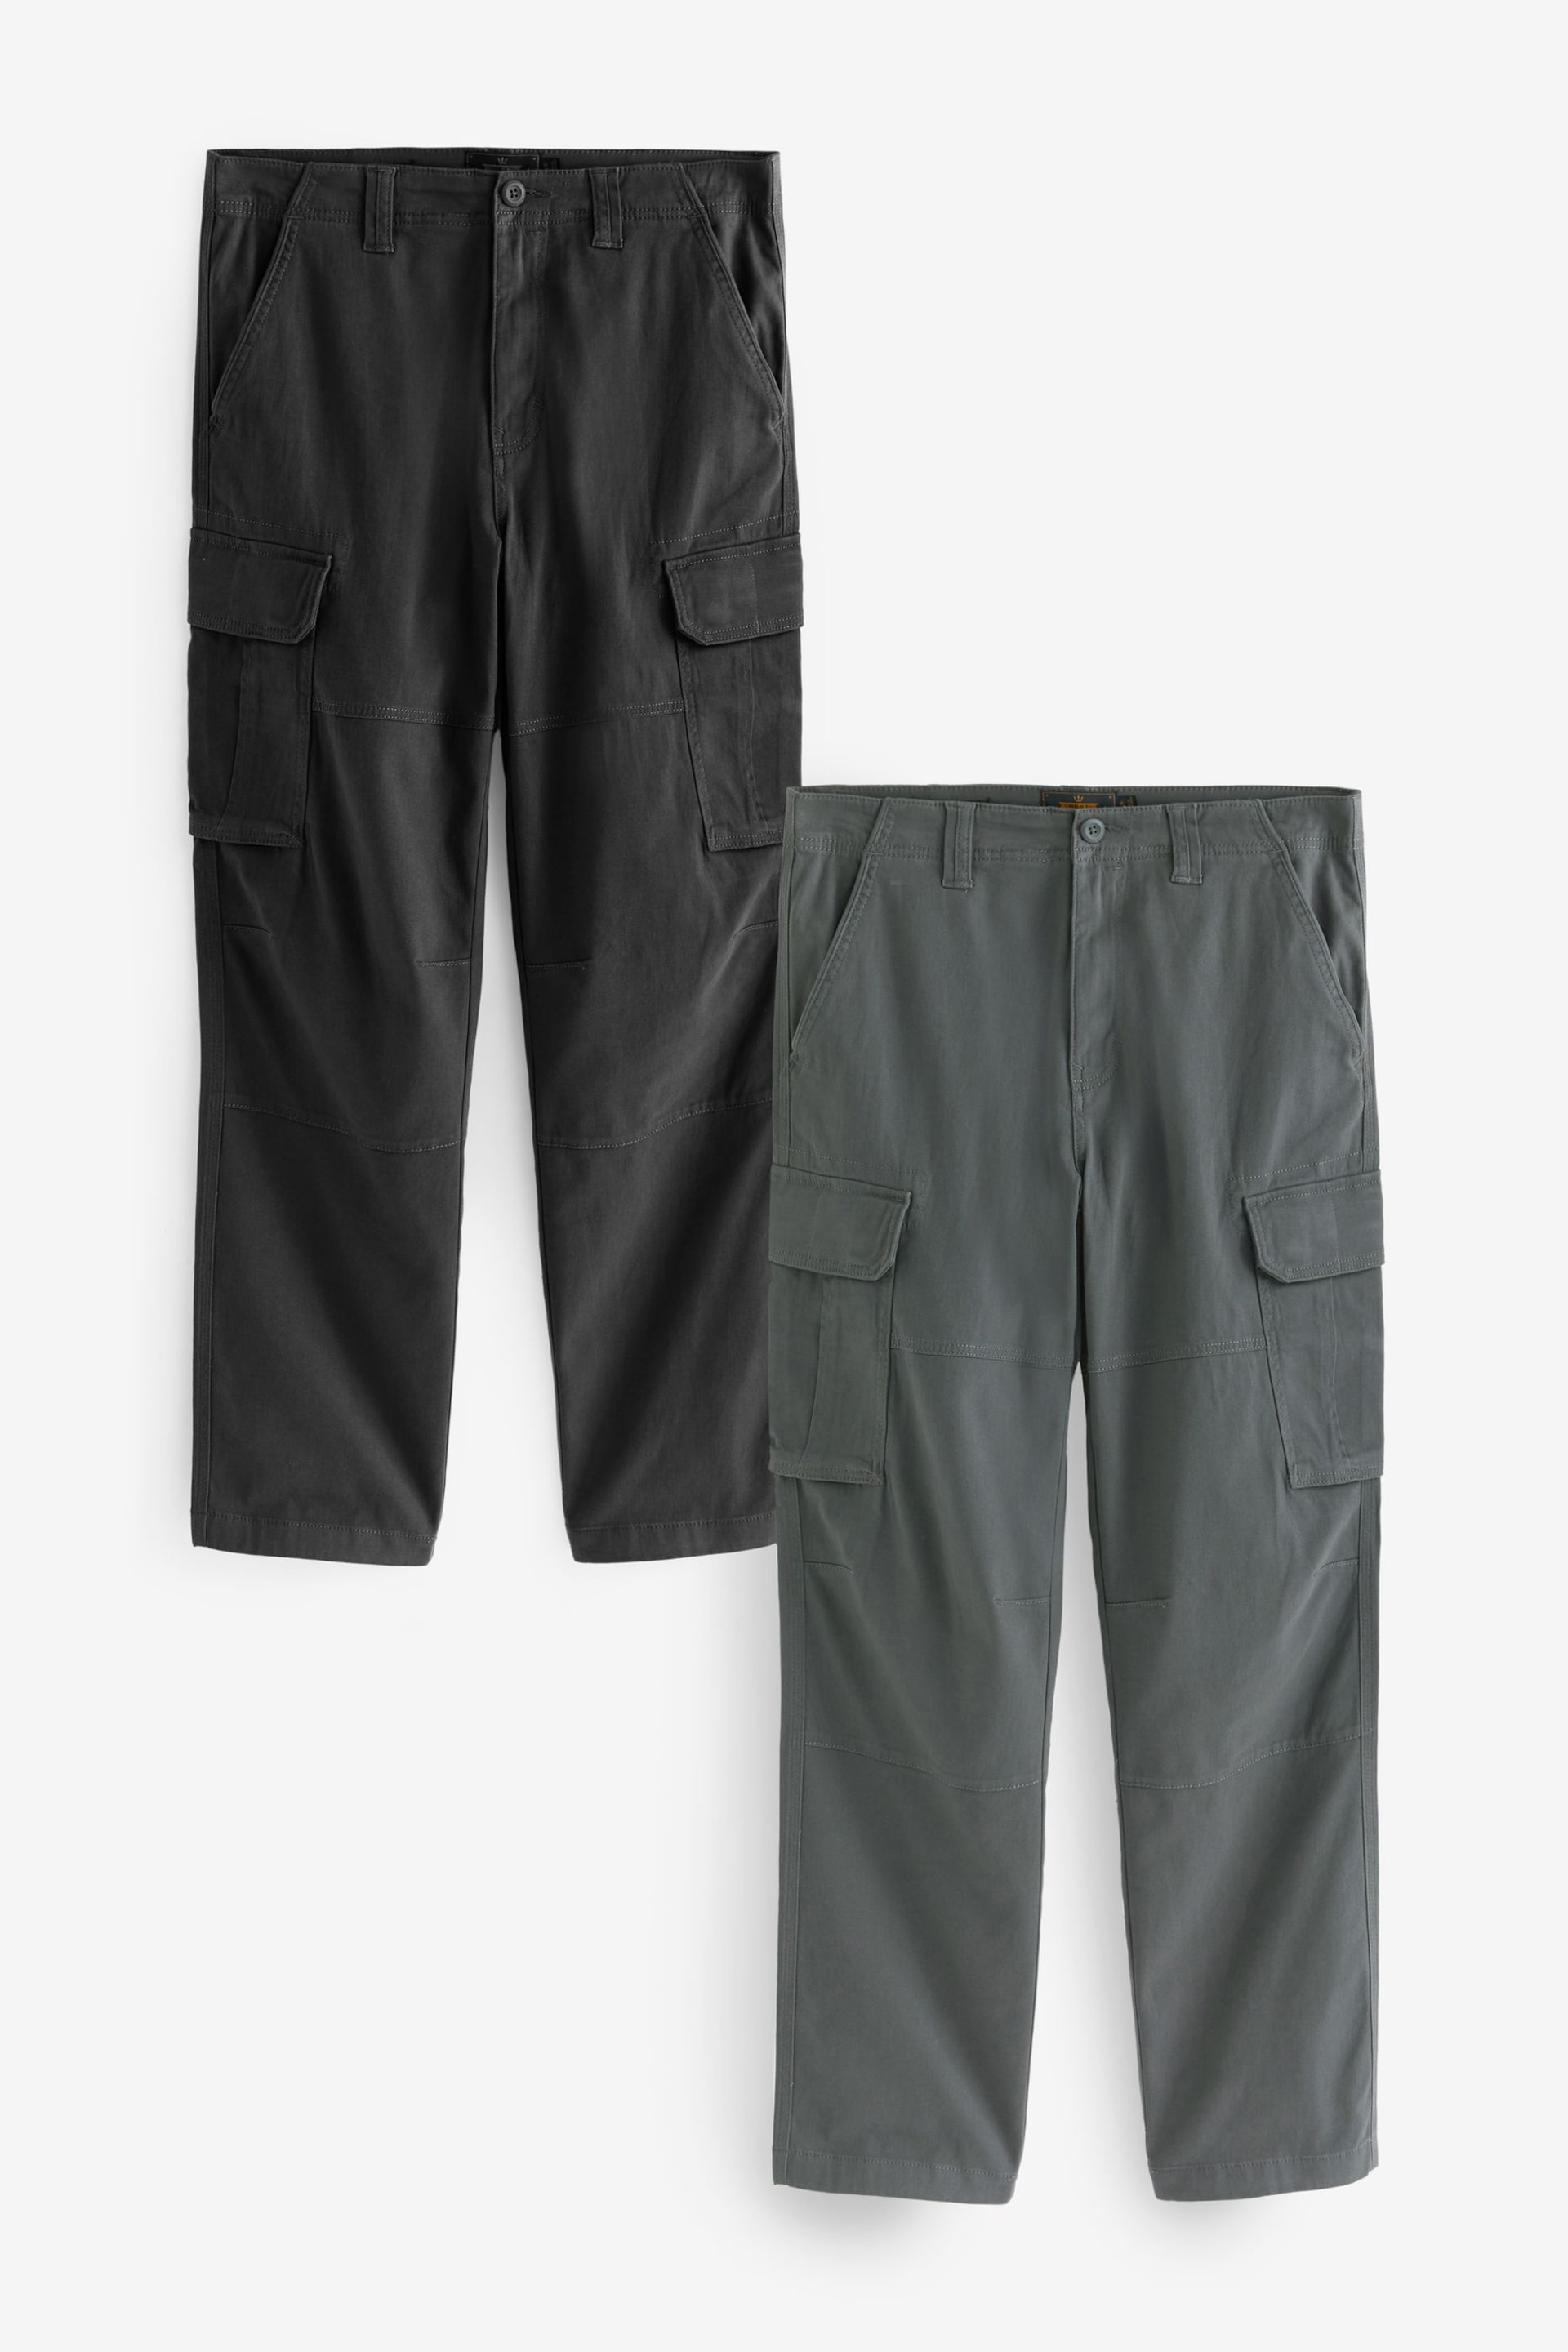 Black/Charcoal Grey Straight Cotton Rich Stretch Cargo Trousers 2 Pack - Image 1 of 13